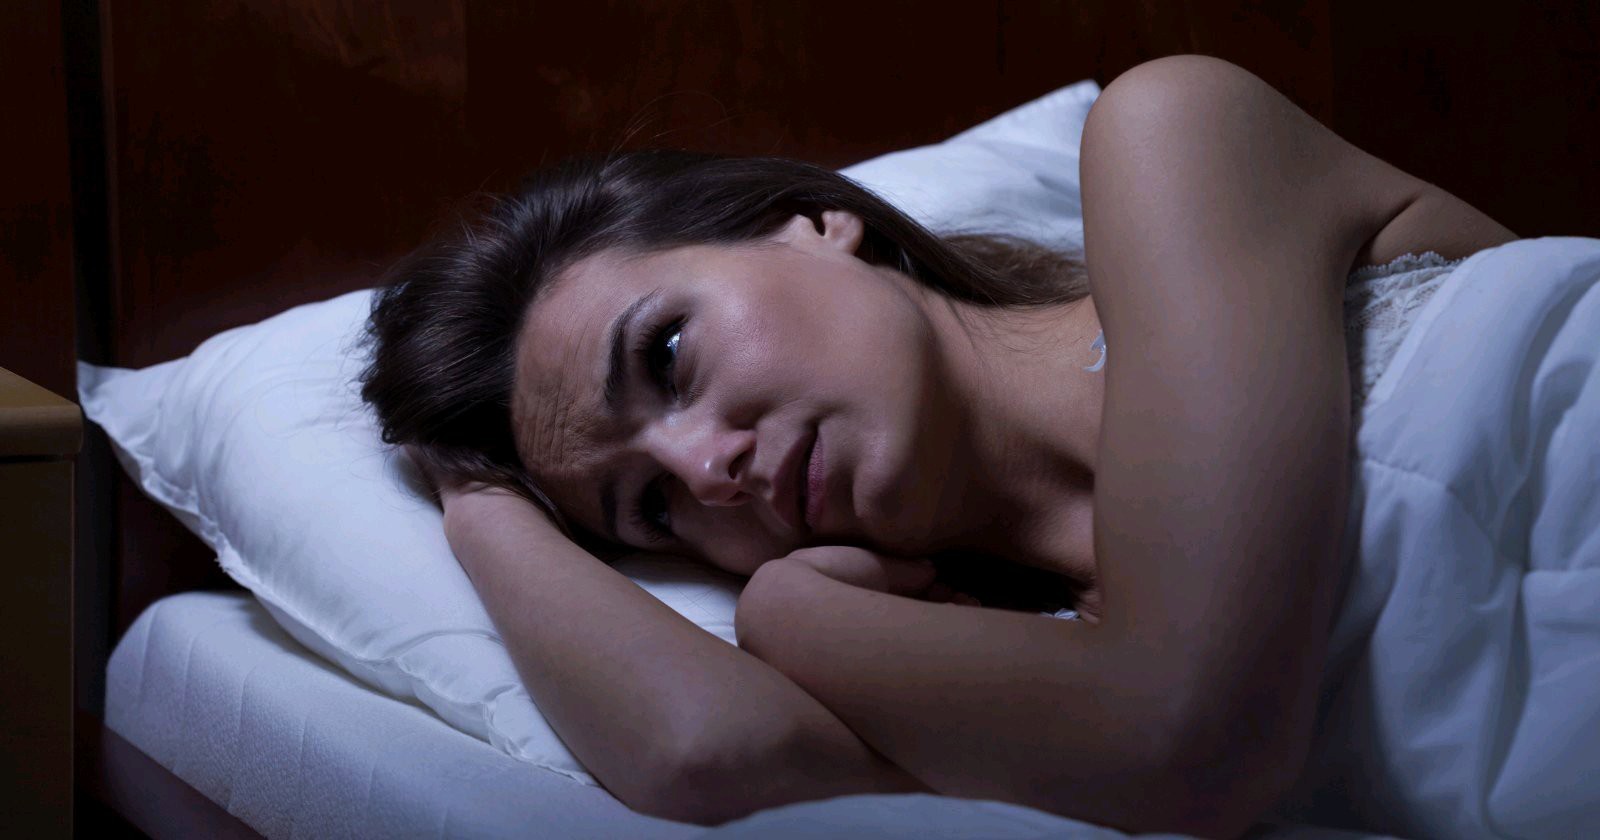 people Who Over Think At Night And Struggle To Sleep Usually Have These 10 Traits